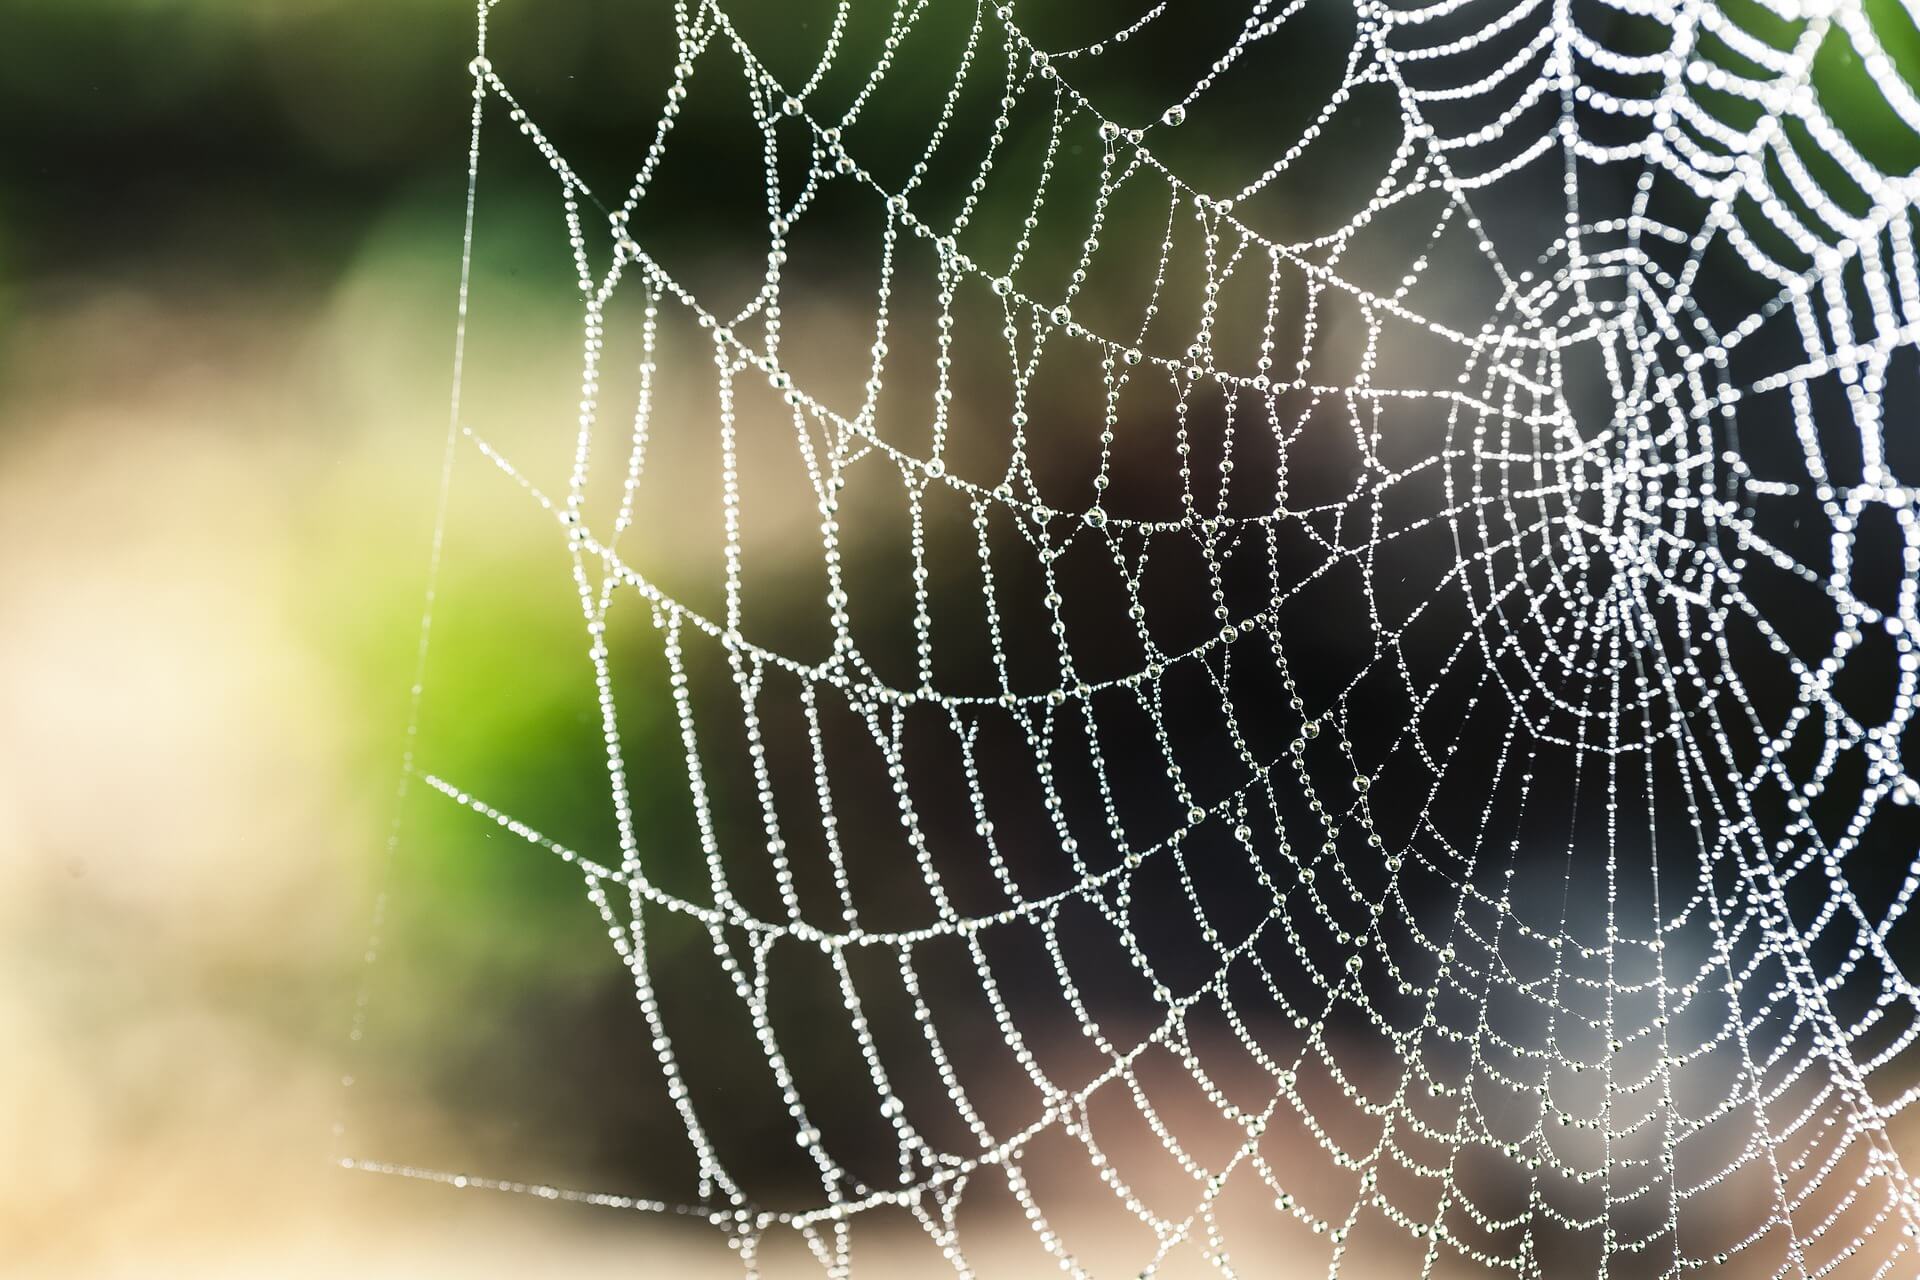 New property and applications of spider silk found 